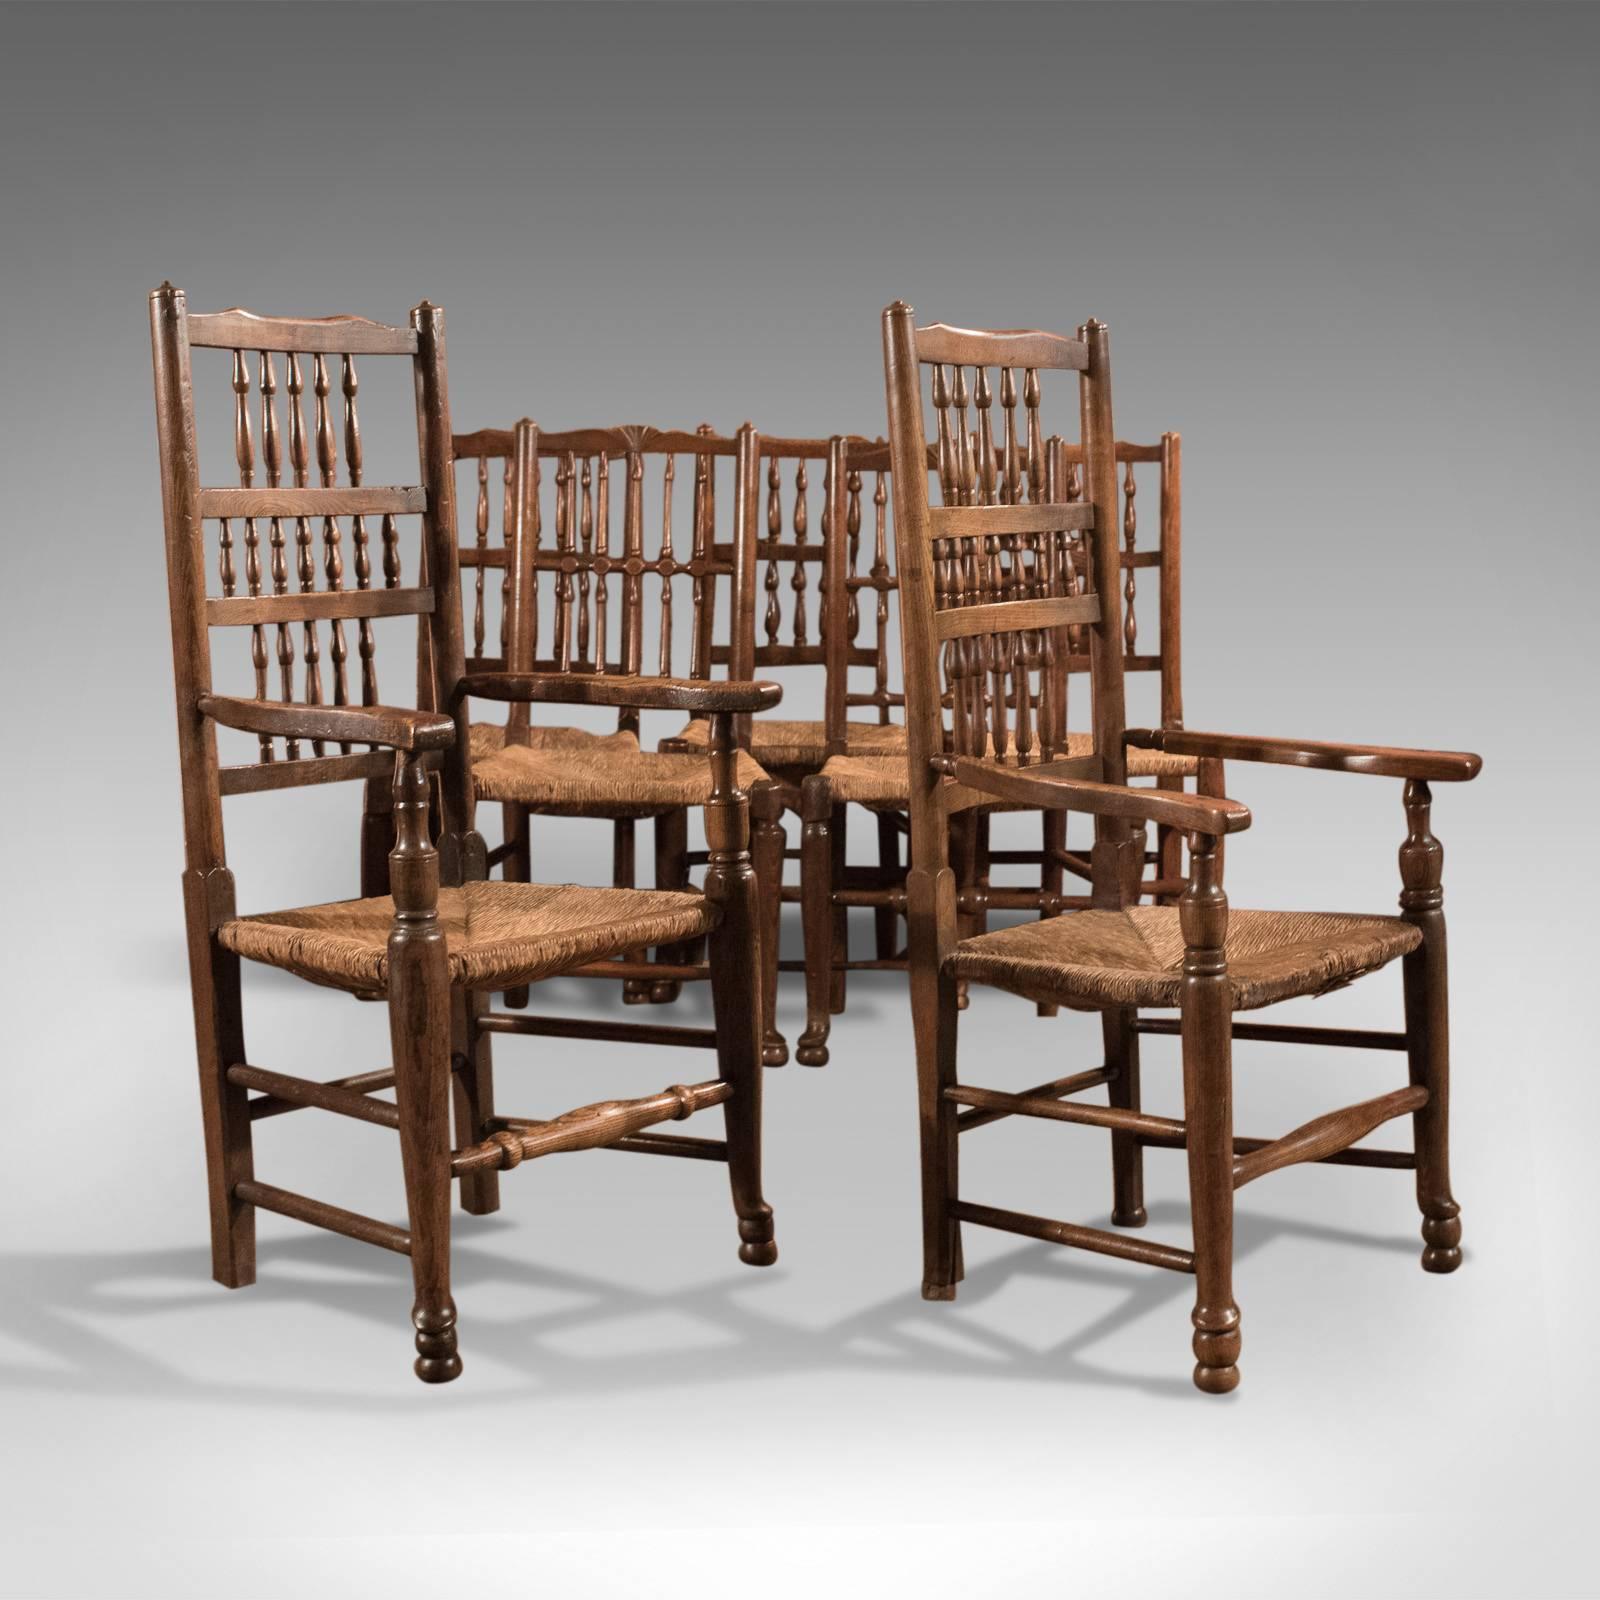 British Harlequin Set of Seven Antique Spindle Back Dining Chairs, circa 1800